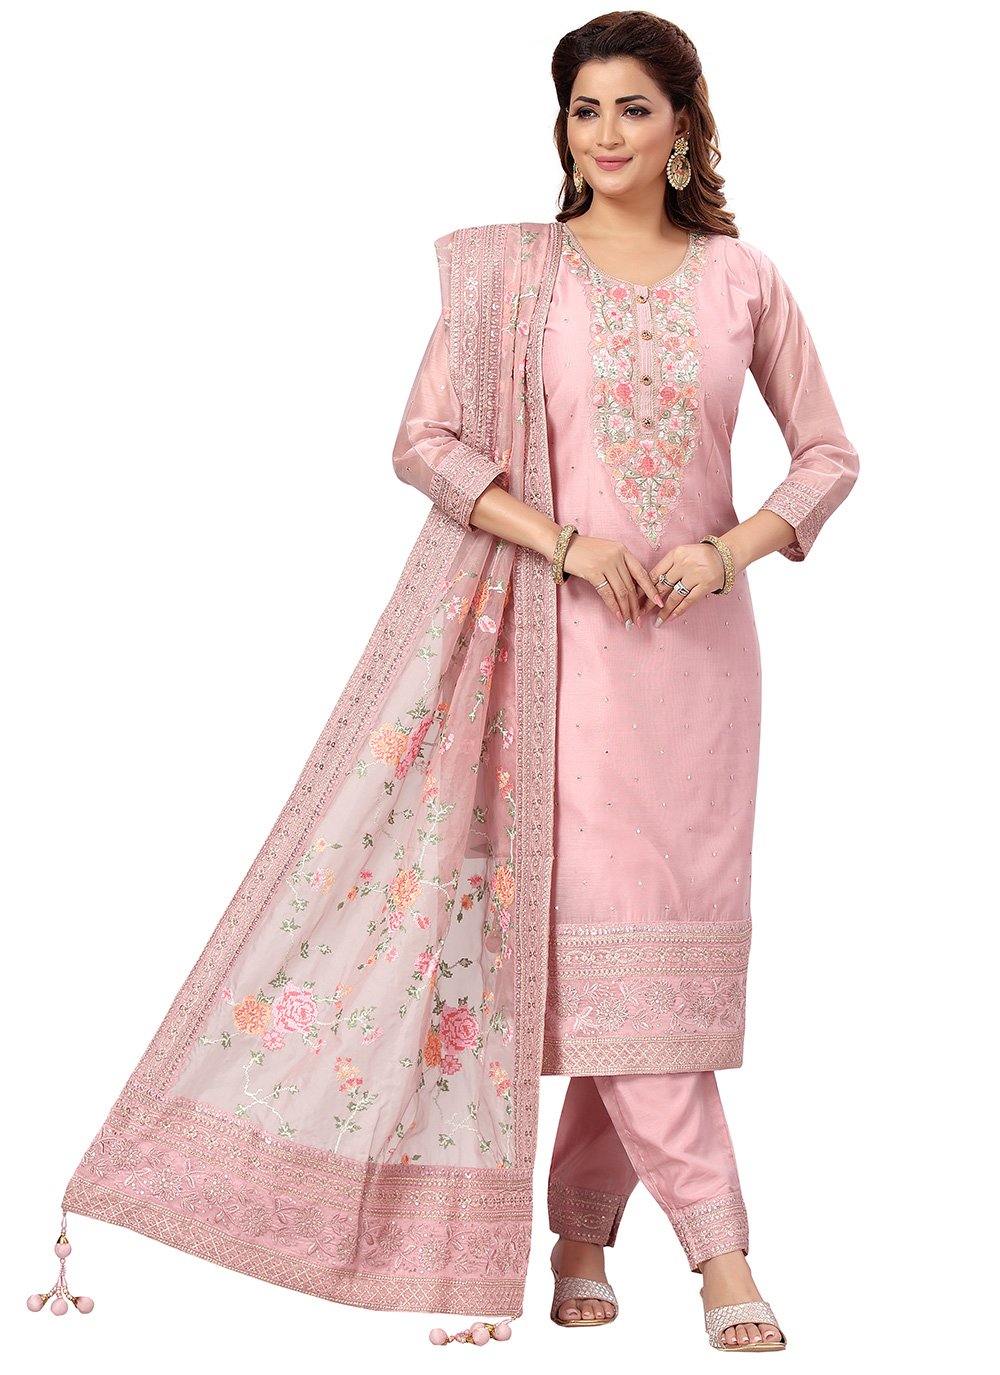 New georgette pink color suit with pure chinnon four side border dupatta.